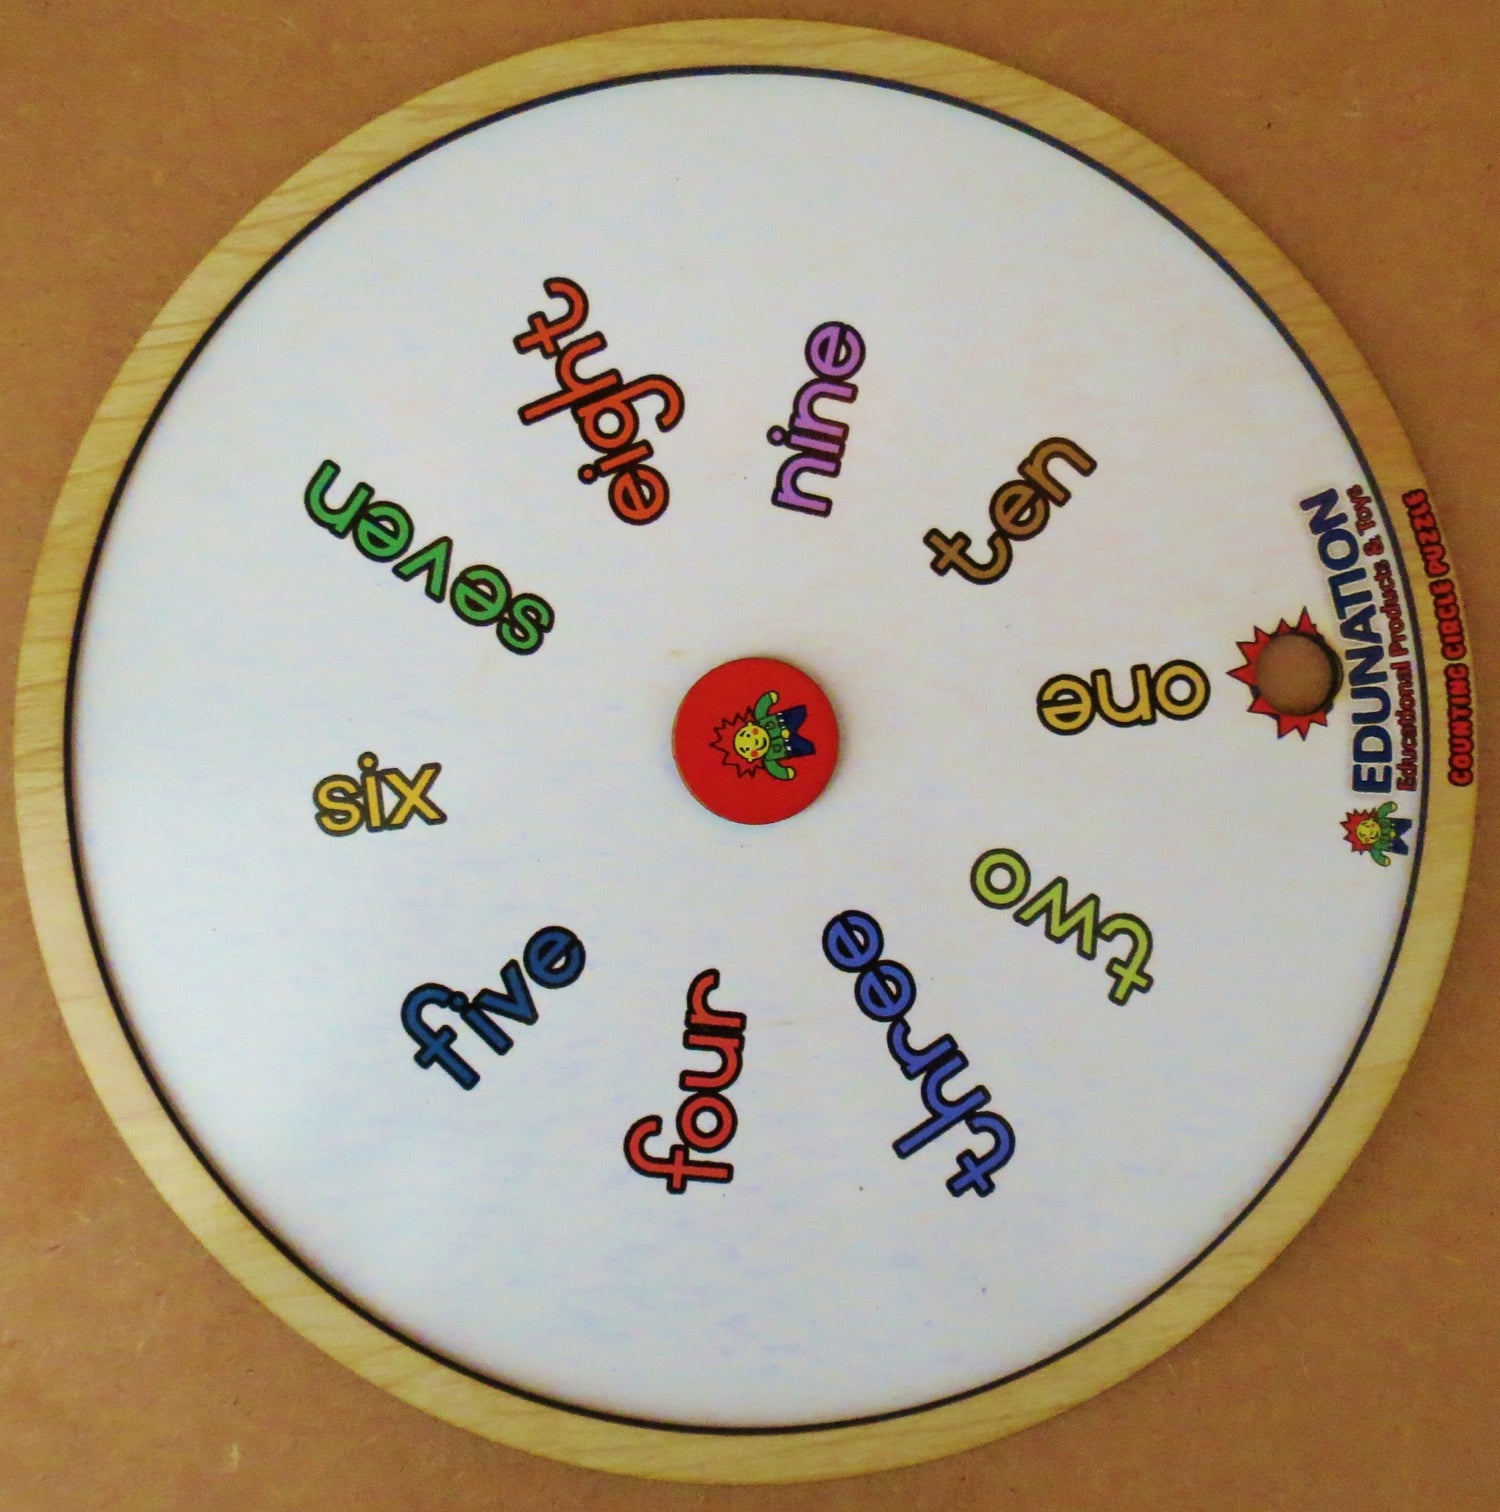 Counting Circle Puzzle - English Edunation South Africa Maths & Numeracy